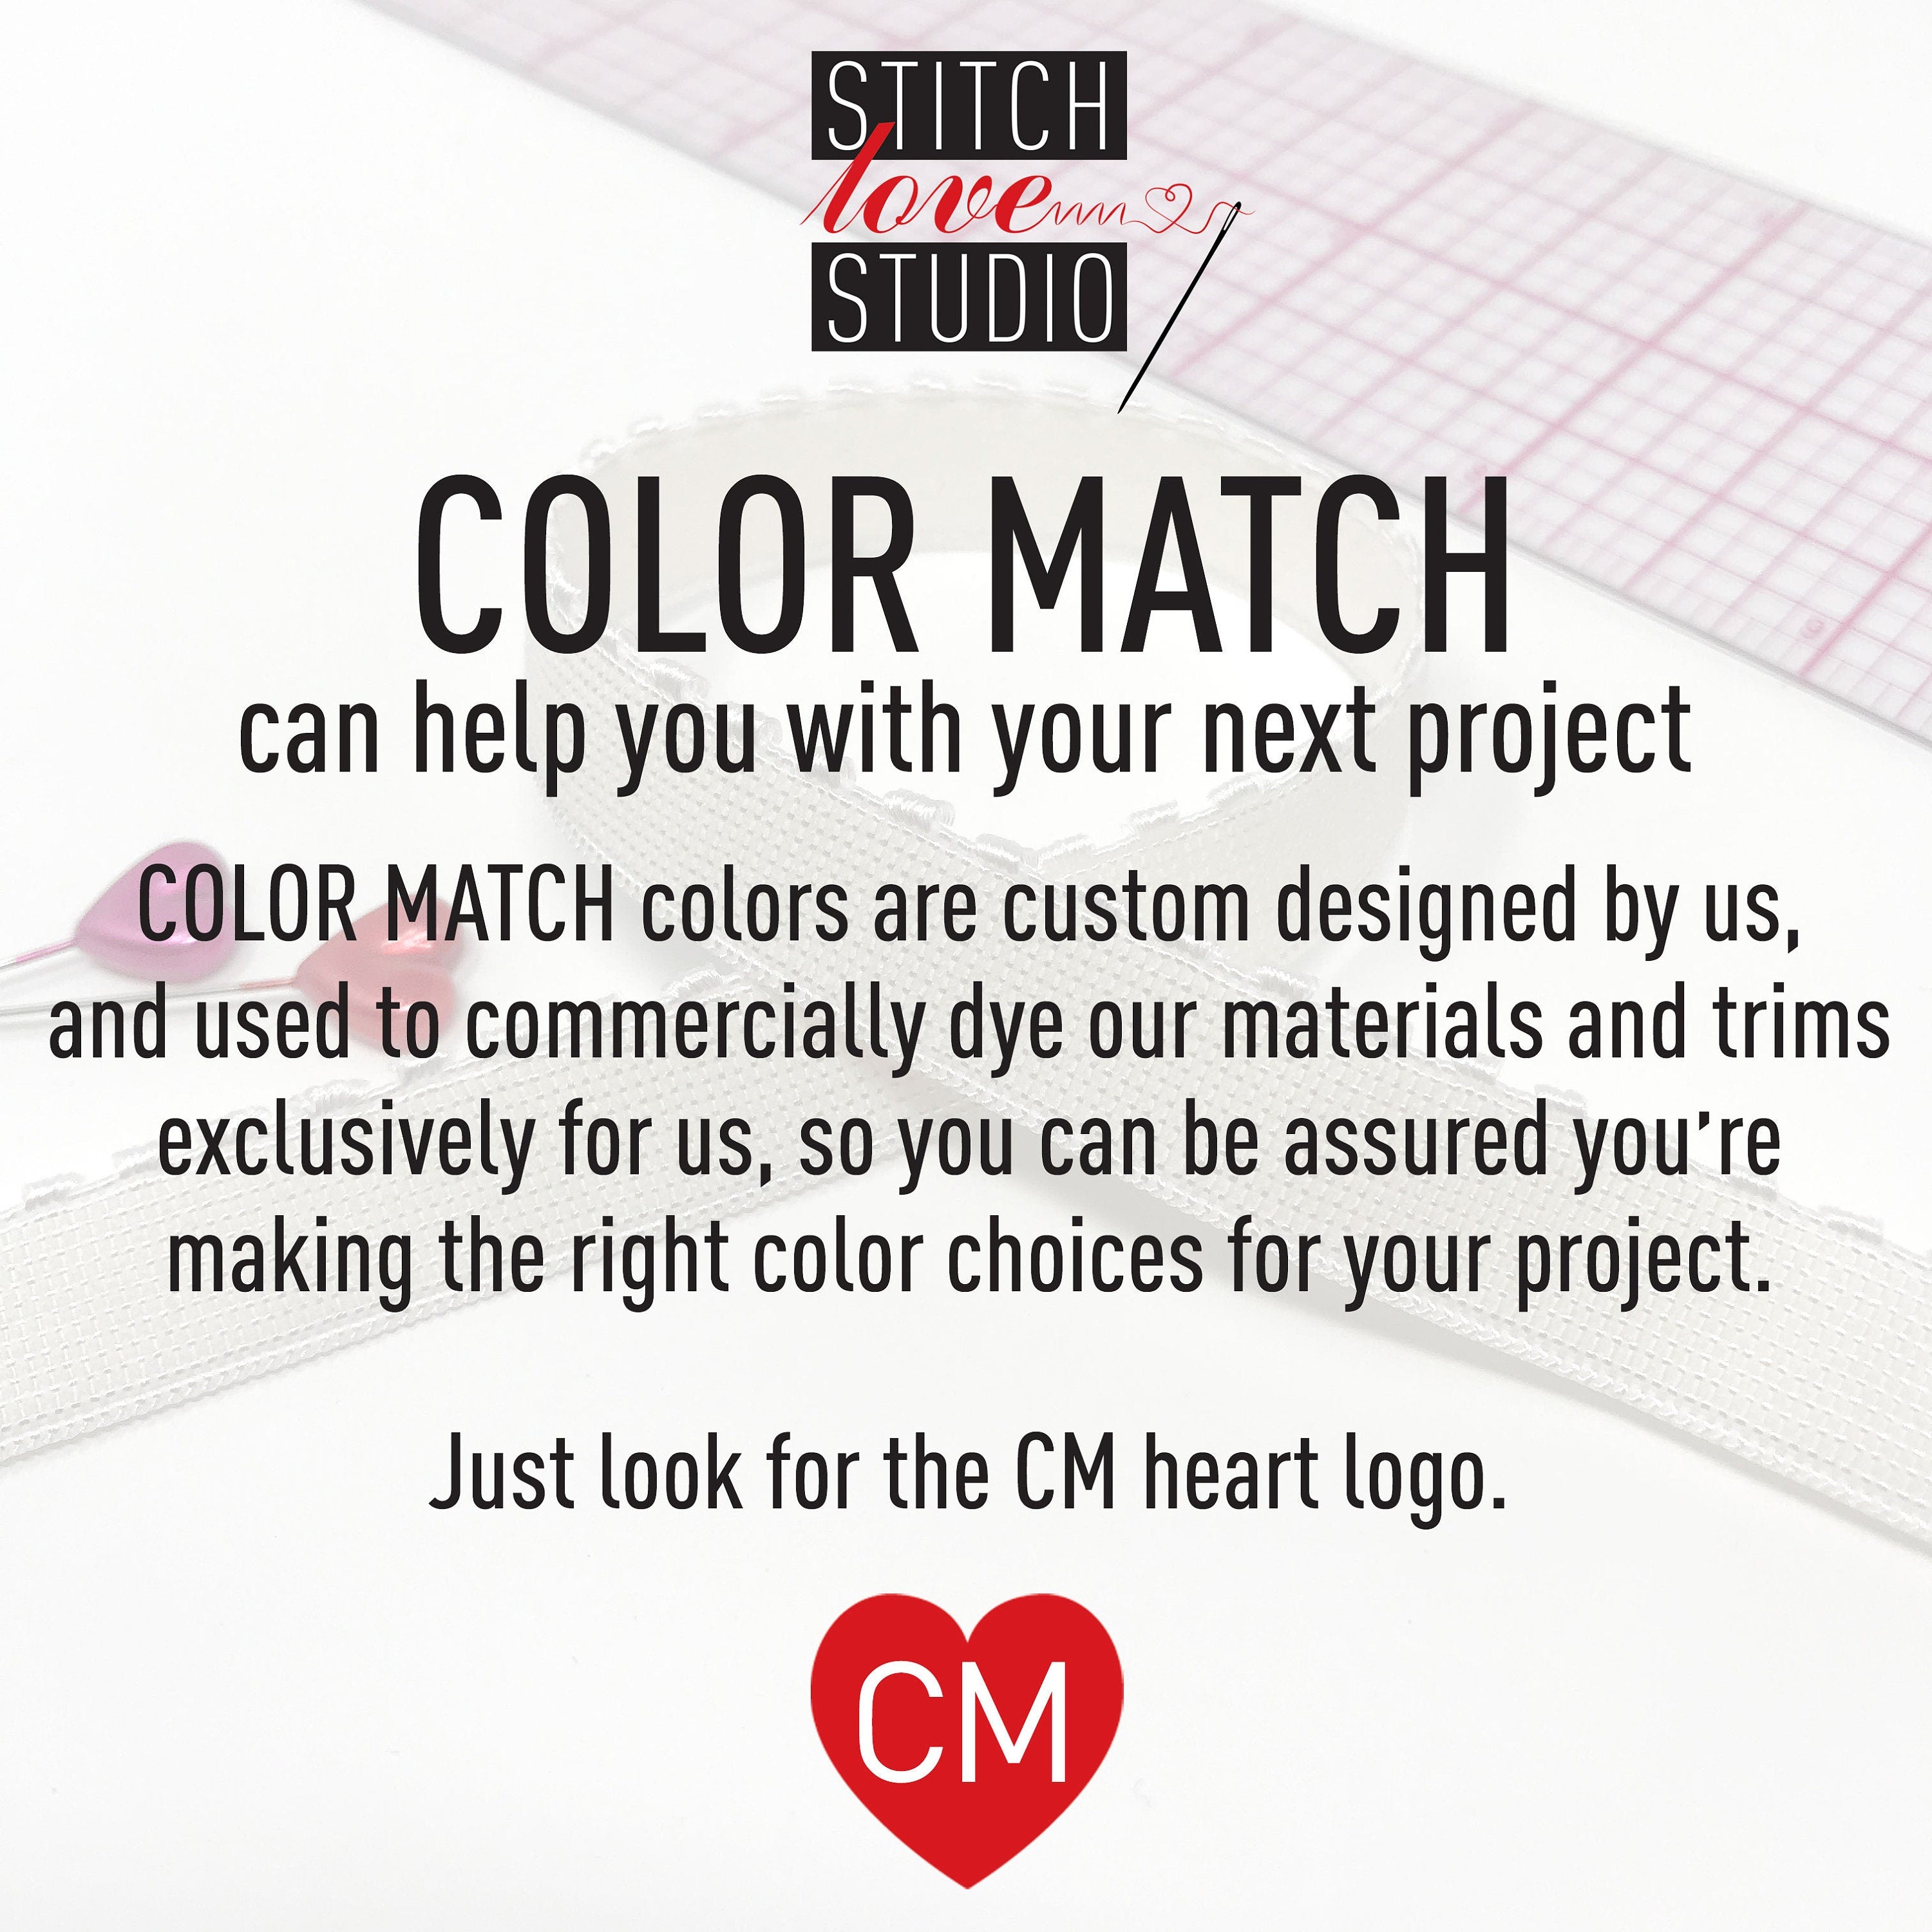 Stitch Love Studio Color Match colors. Just look for the CM heart logo.